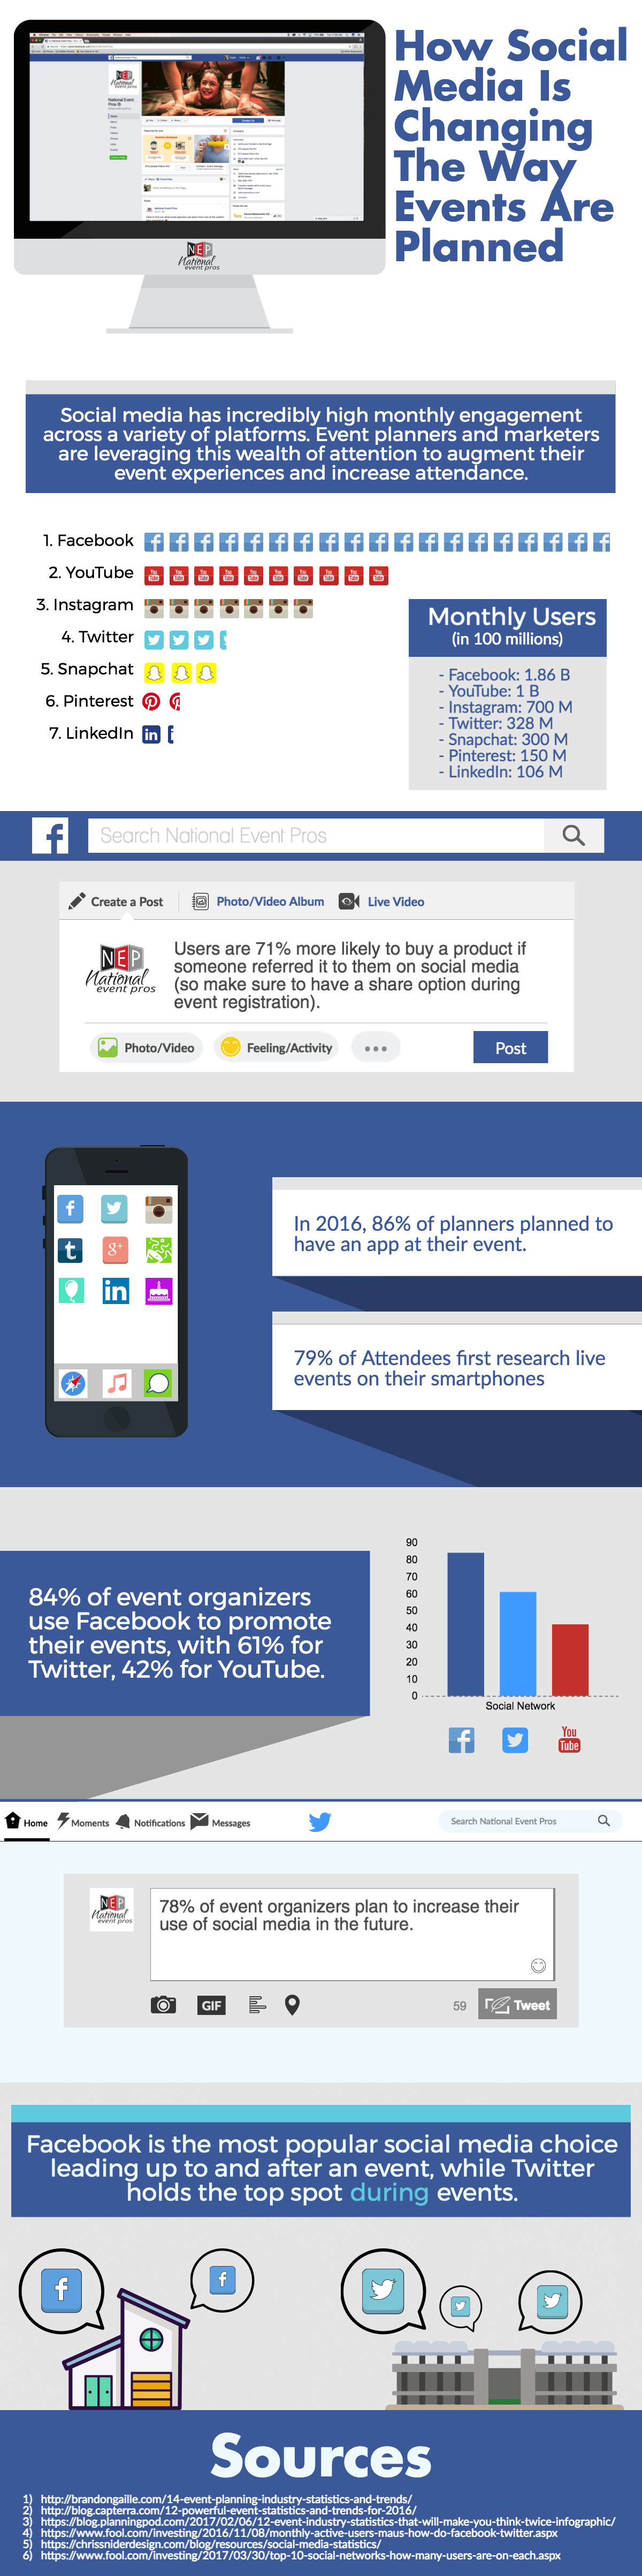 Infographic: How Social Media Is Changing Event Planning